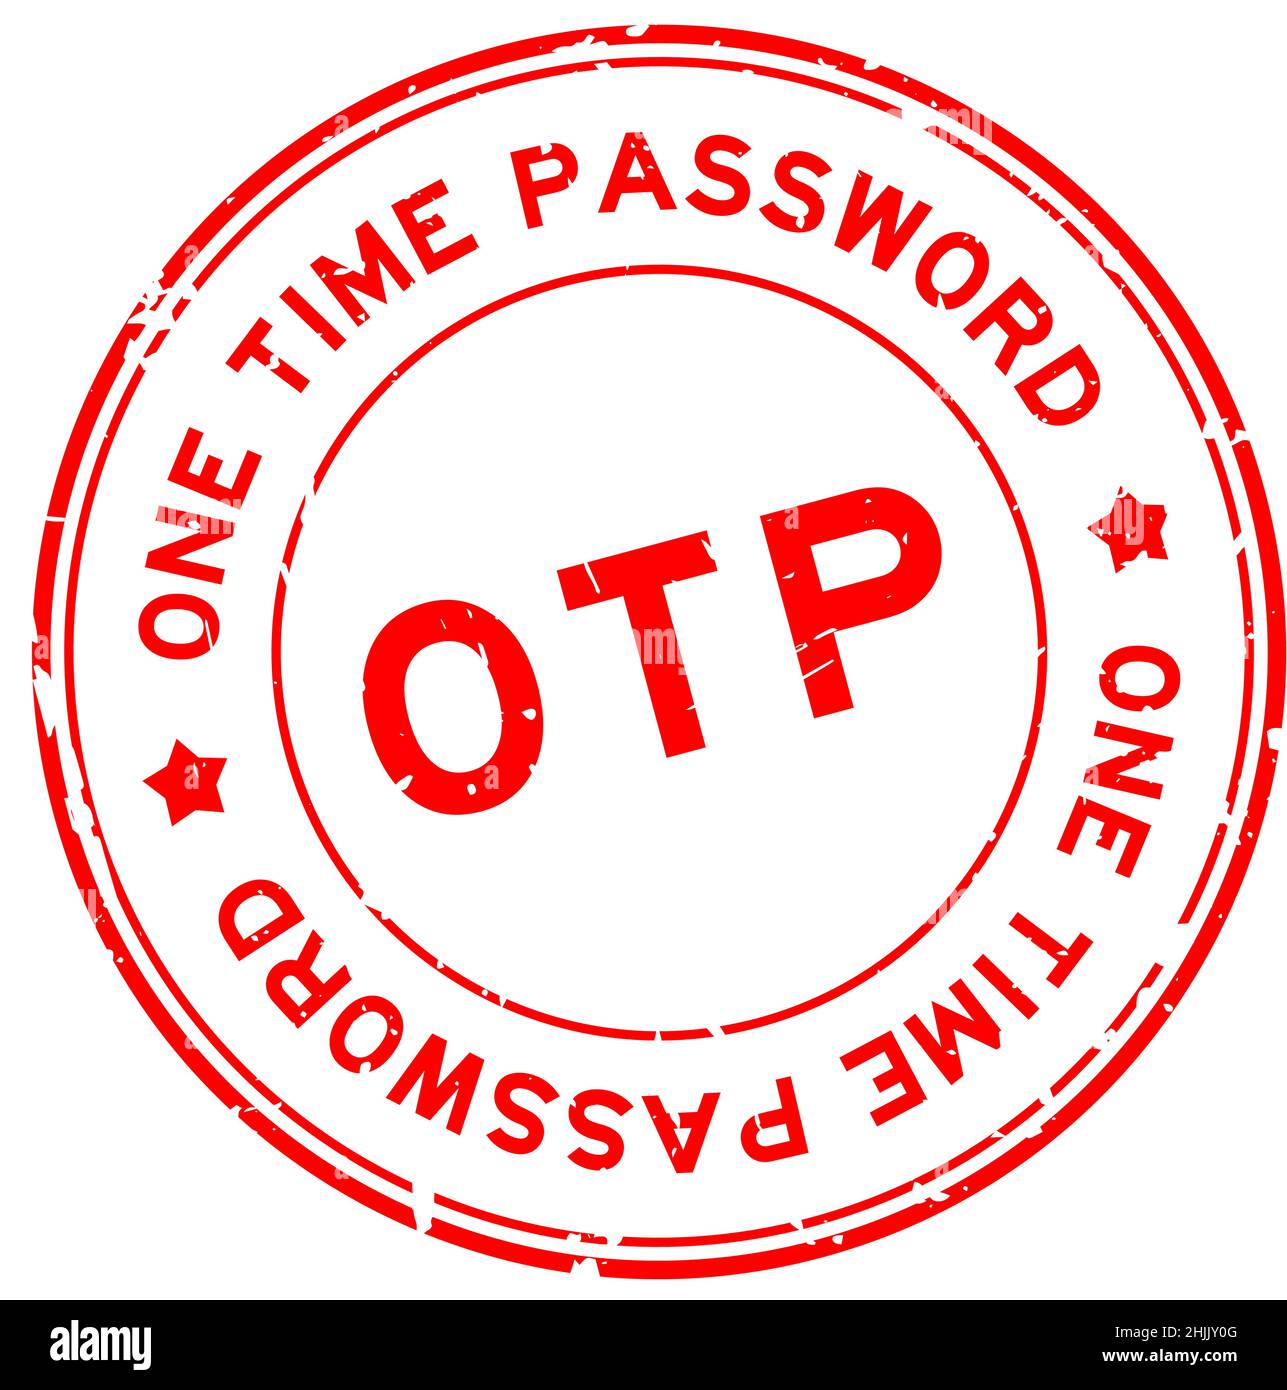 What Is a One-Time Password (OTP)?